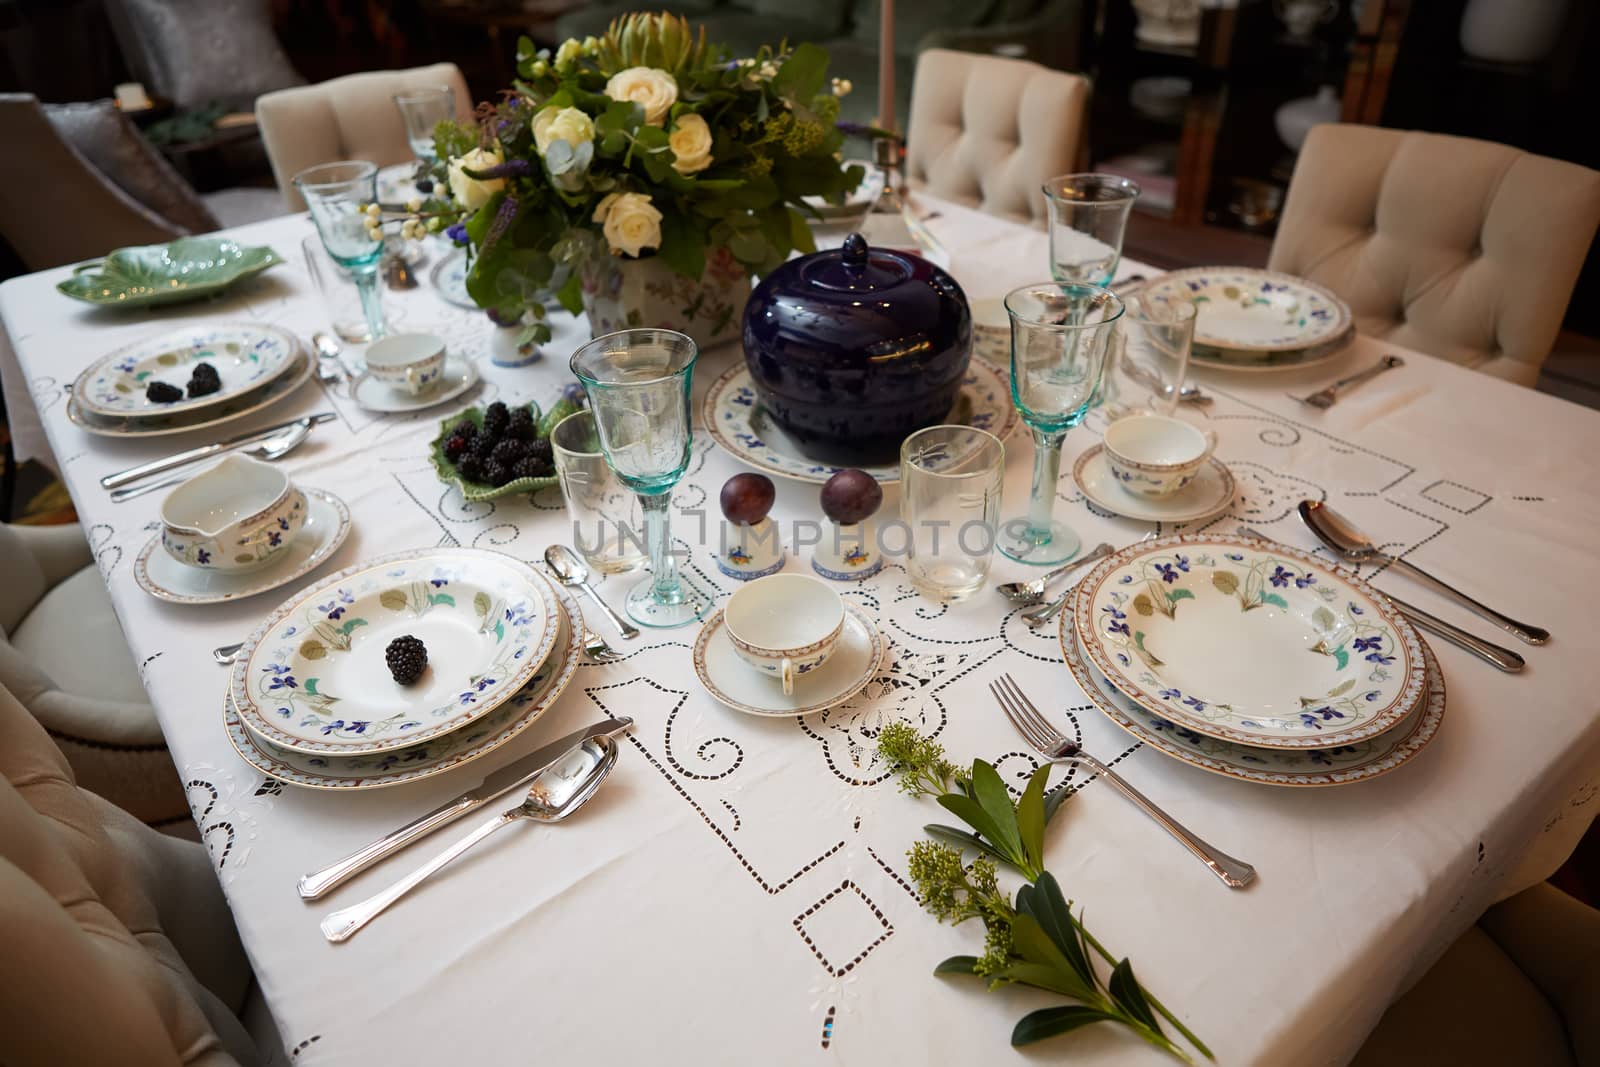 Beautifully decorated table set with flowers, candles, plates and serviettes for wedding or another event in the restaurant. by sarymsakov